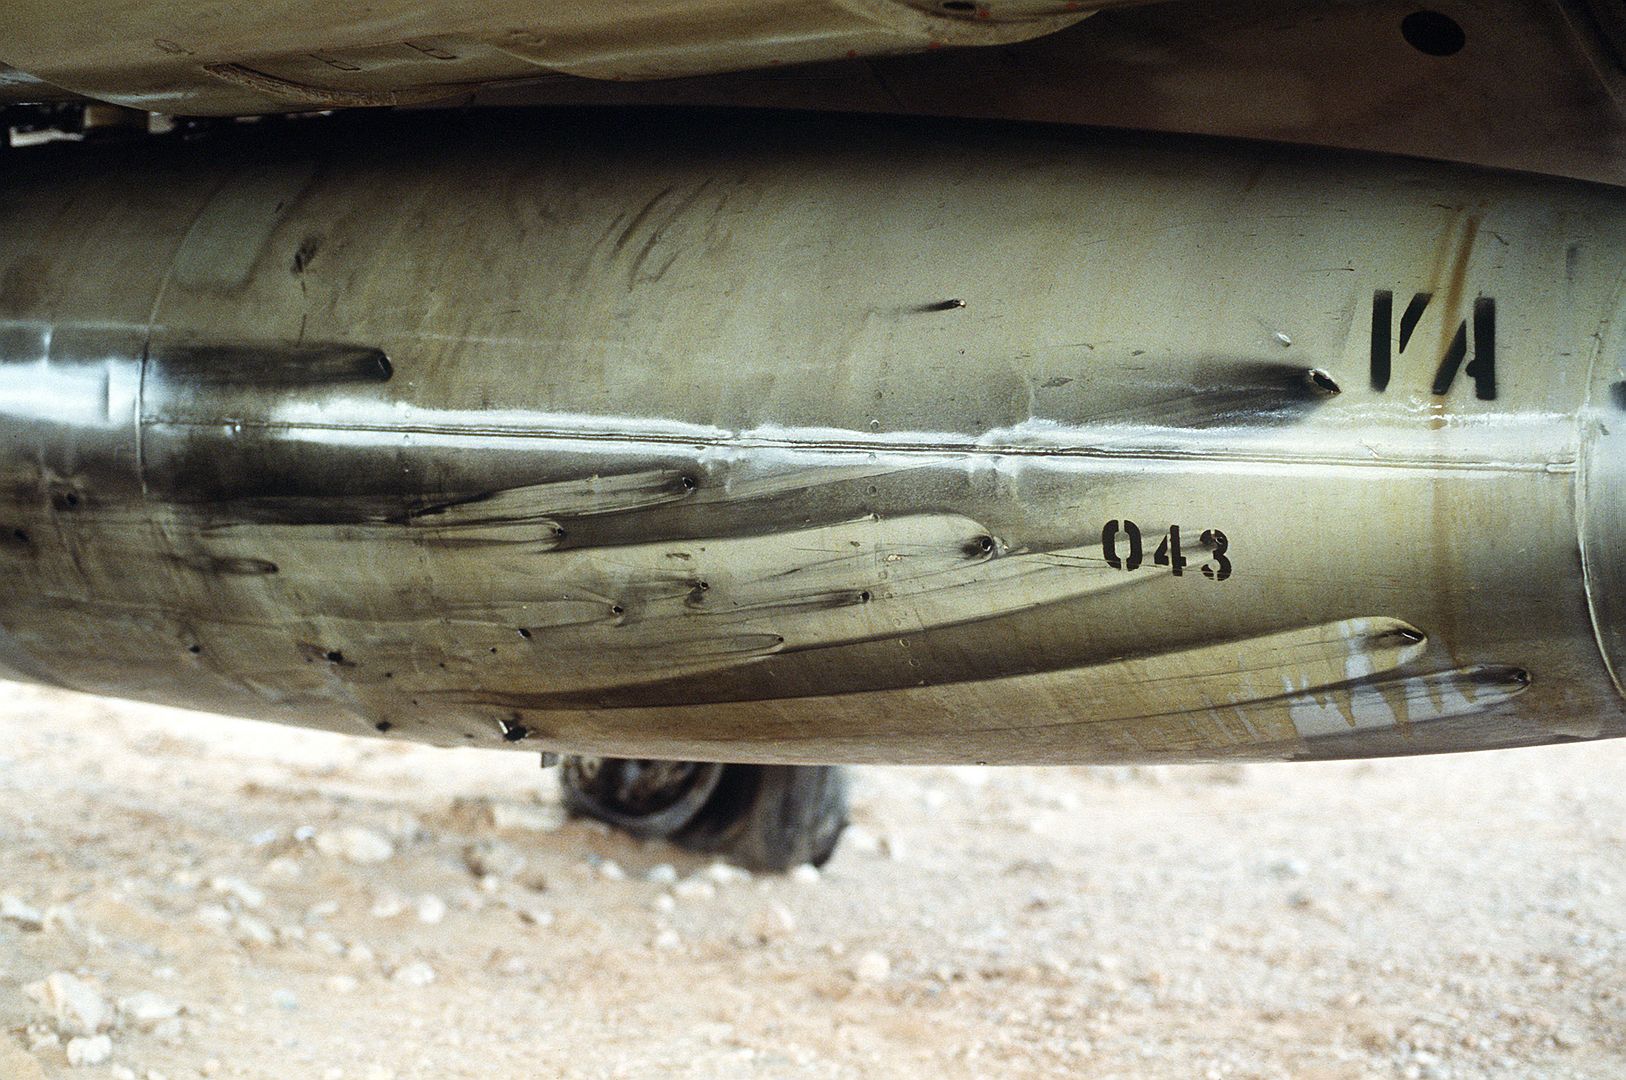 A 6E Intruder Attack Aircraft From Attack Squadron 35 Deployed From The Aircraft Carrier USS SARATOGA Shows Battle Damage From A Mission At The Start Of Operation Desert Storm 5